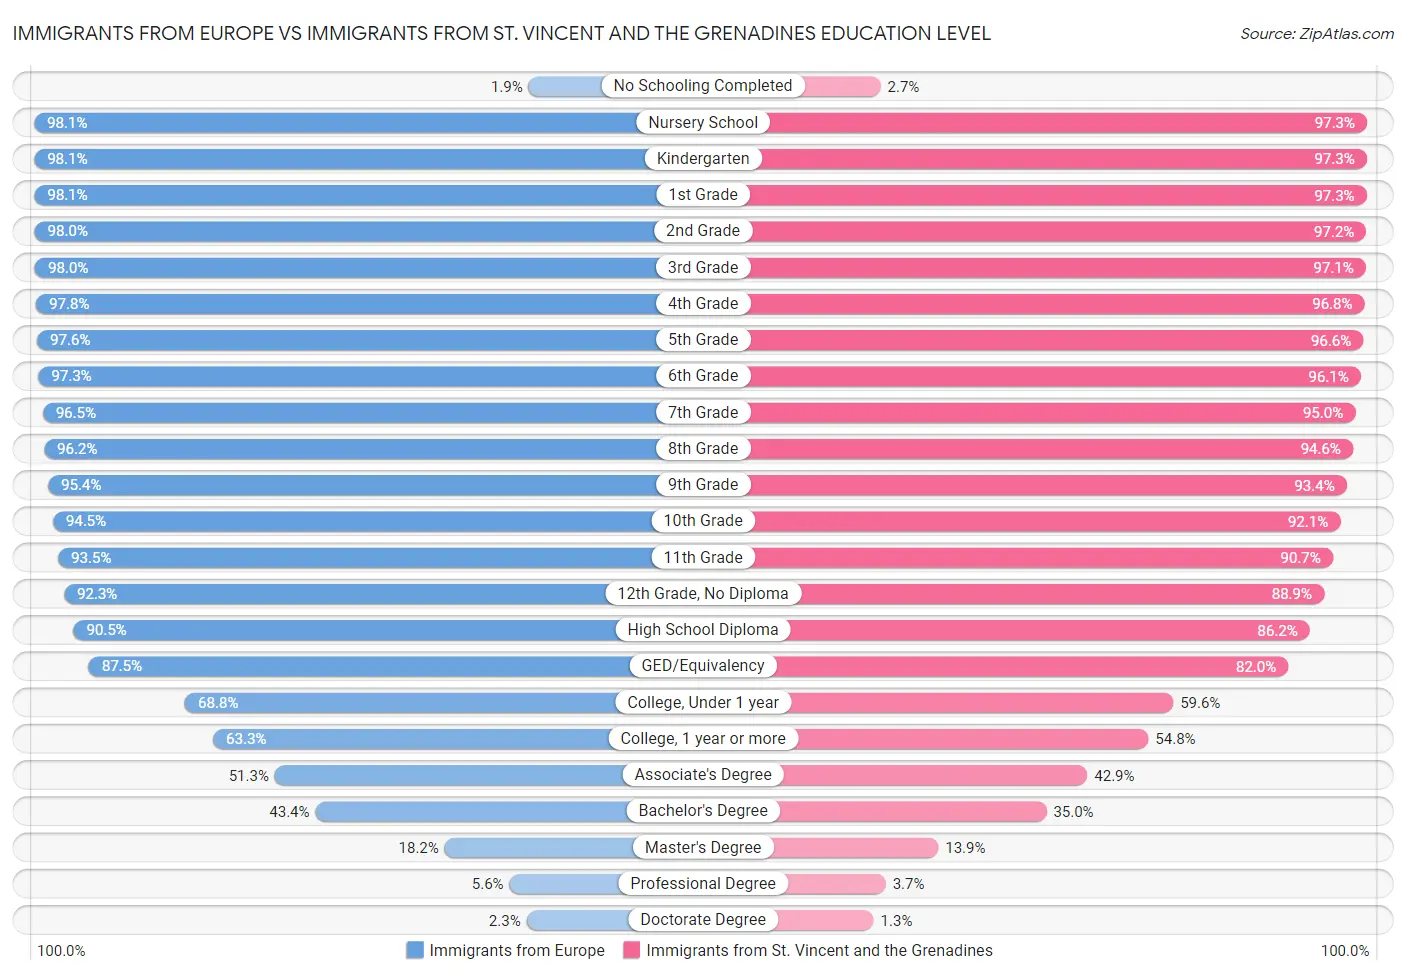 Immigrants from Europe vs Immigrants from St. Vincent and the Grenadines Education Level